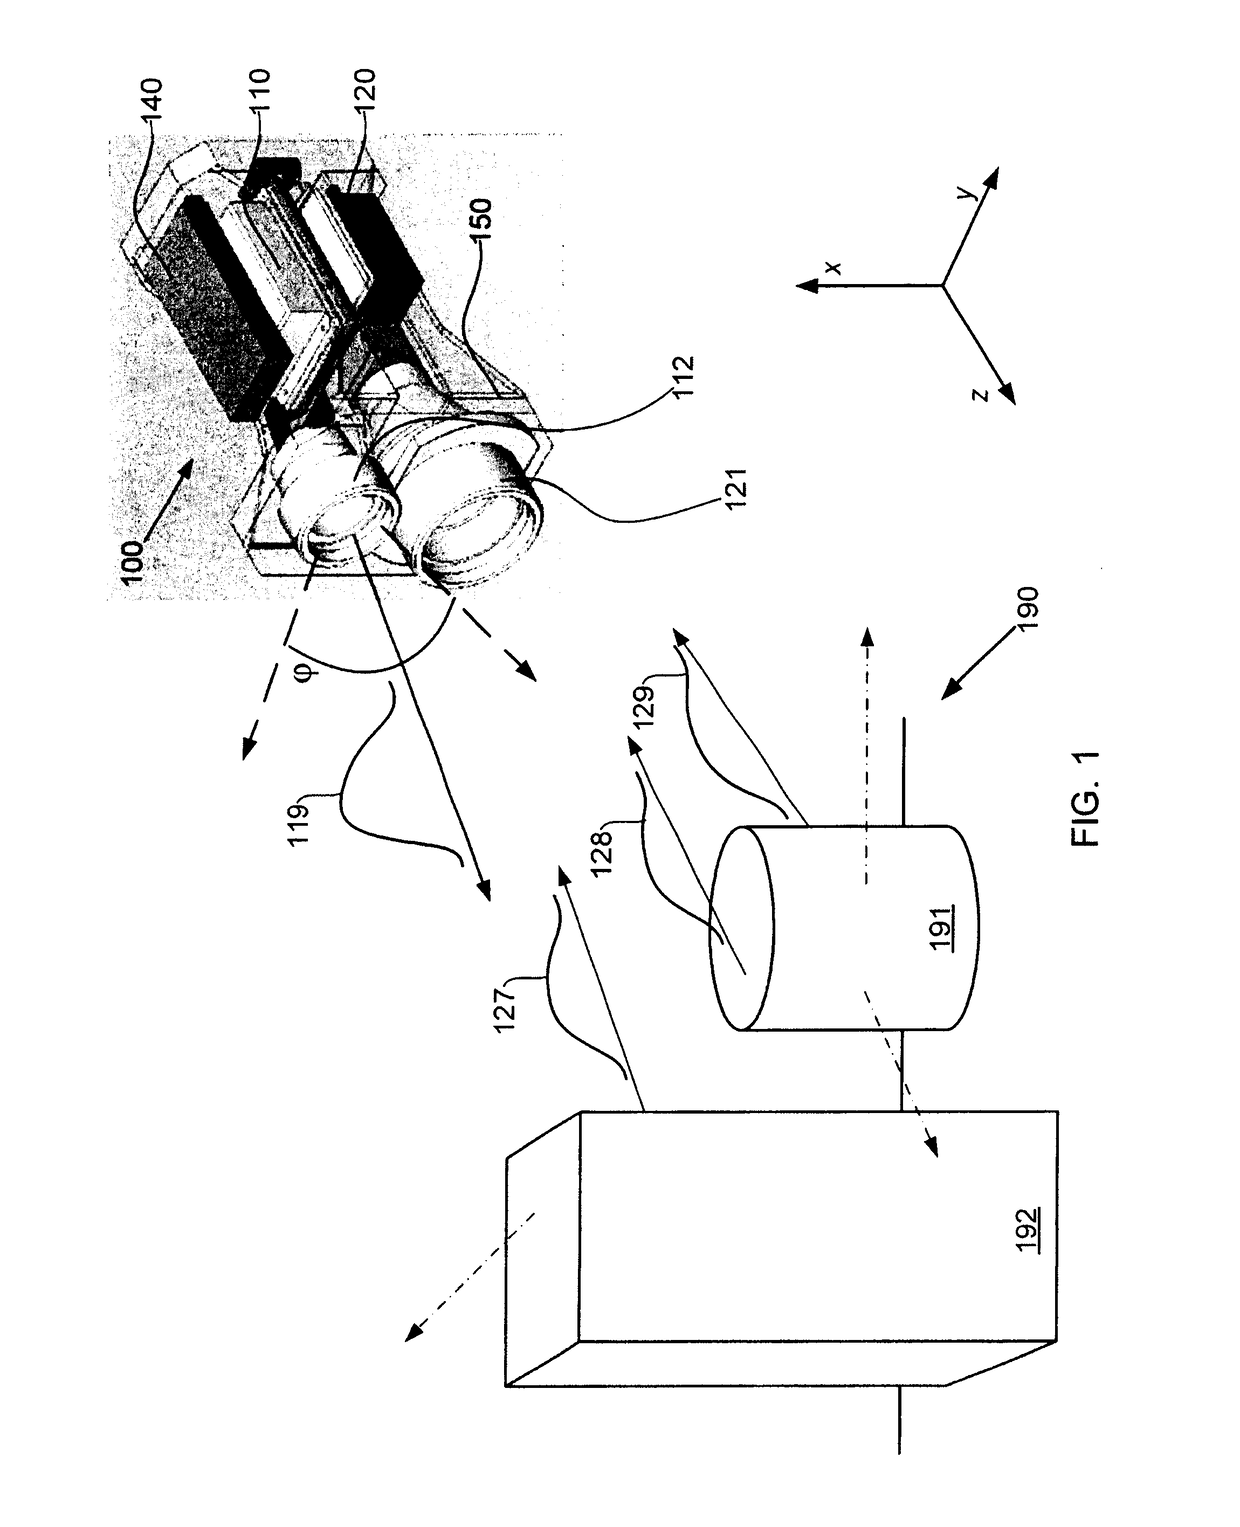 Systems and methods of high resolution three-dimensional imaging